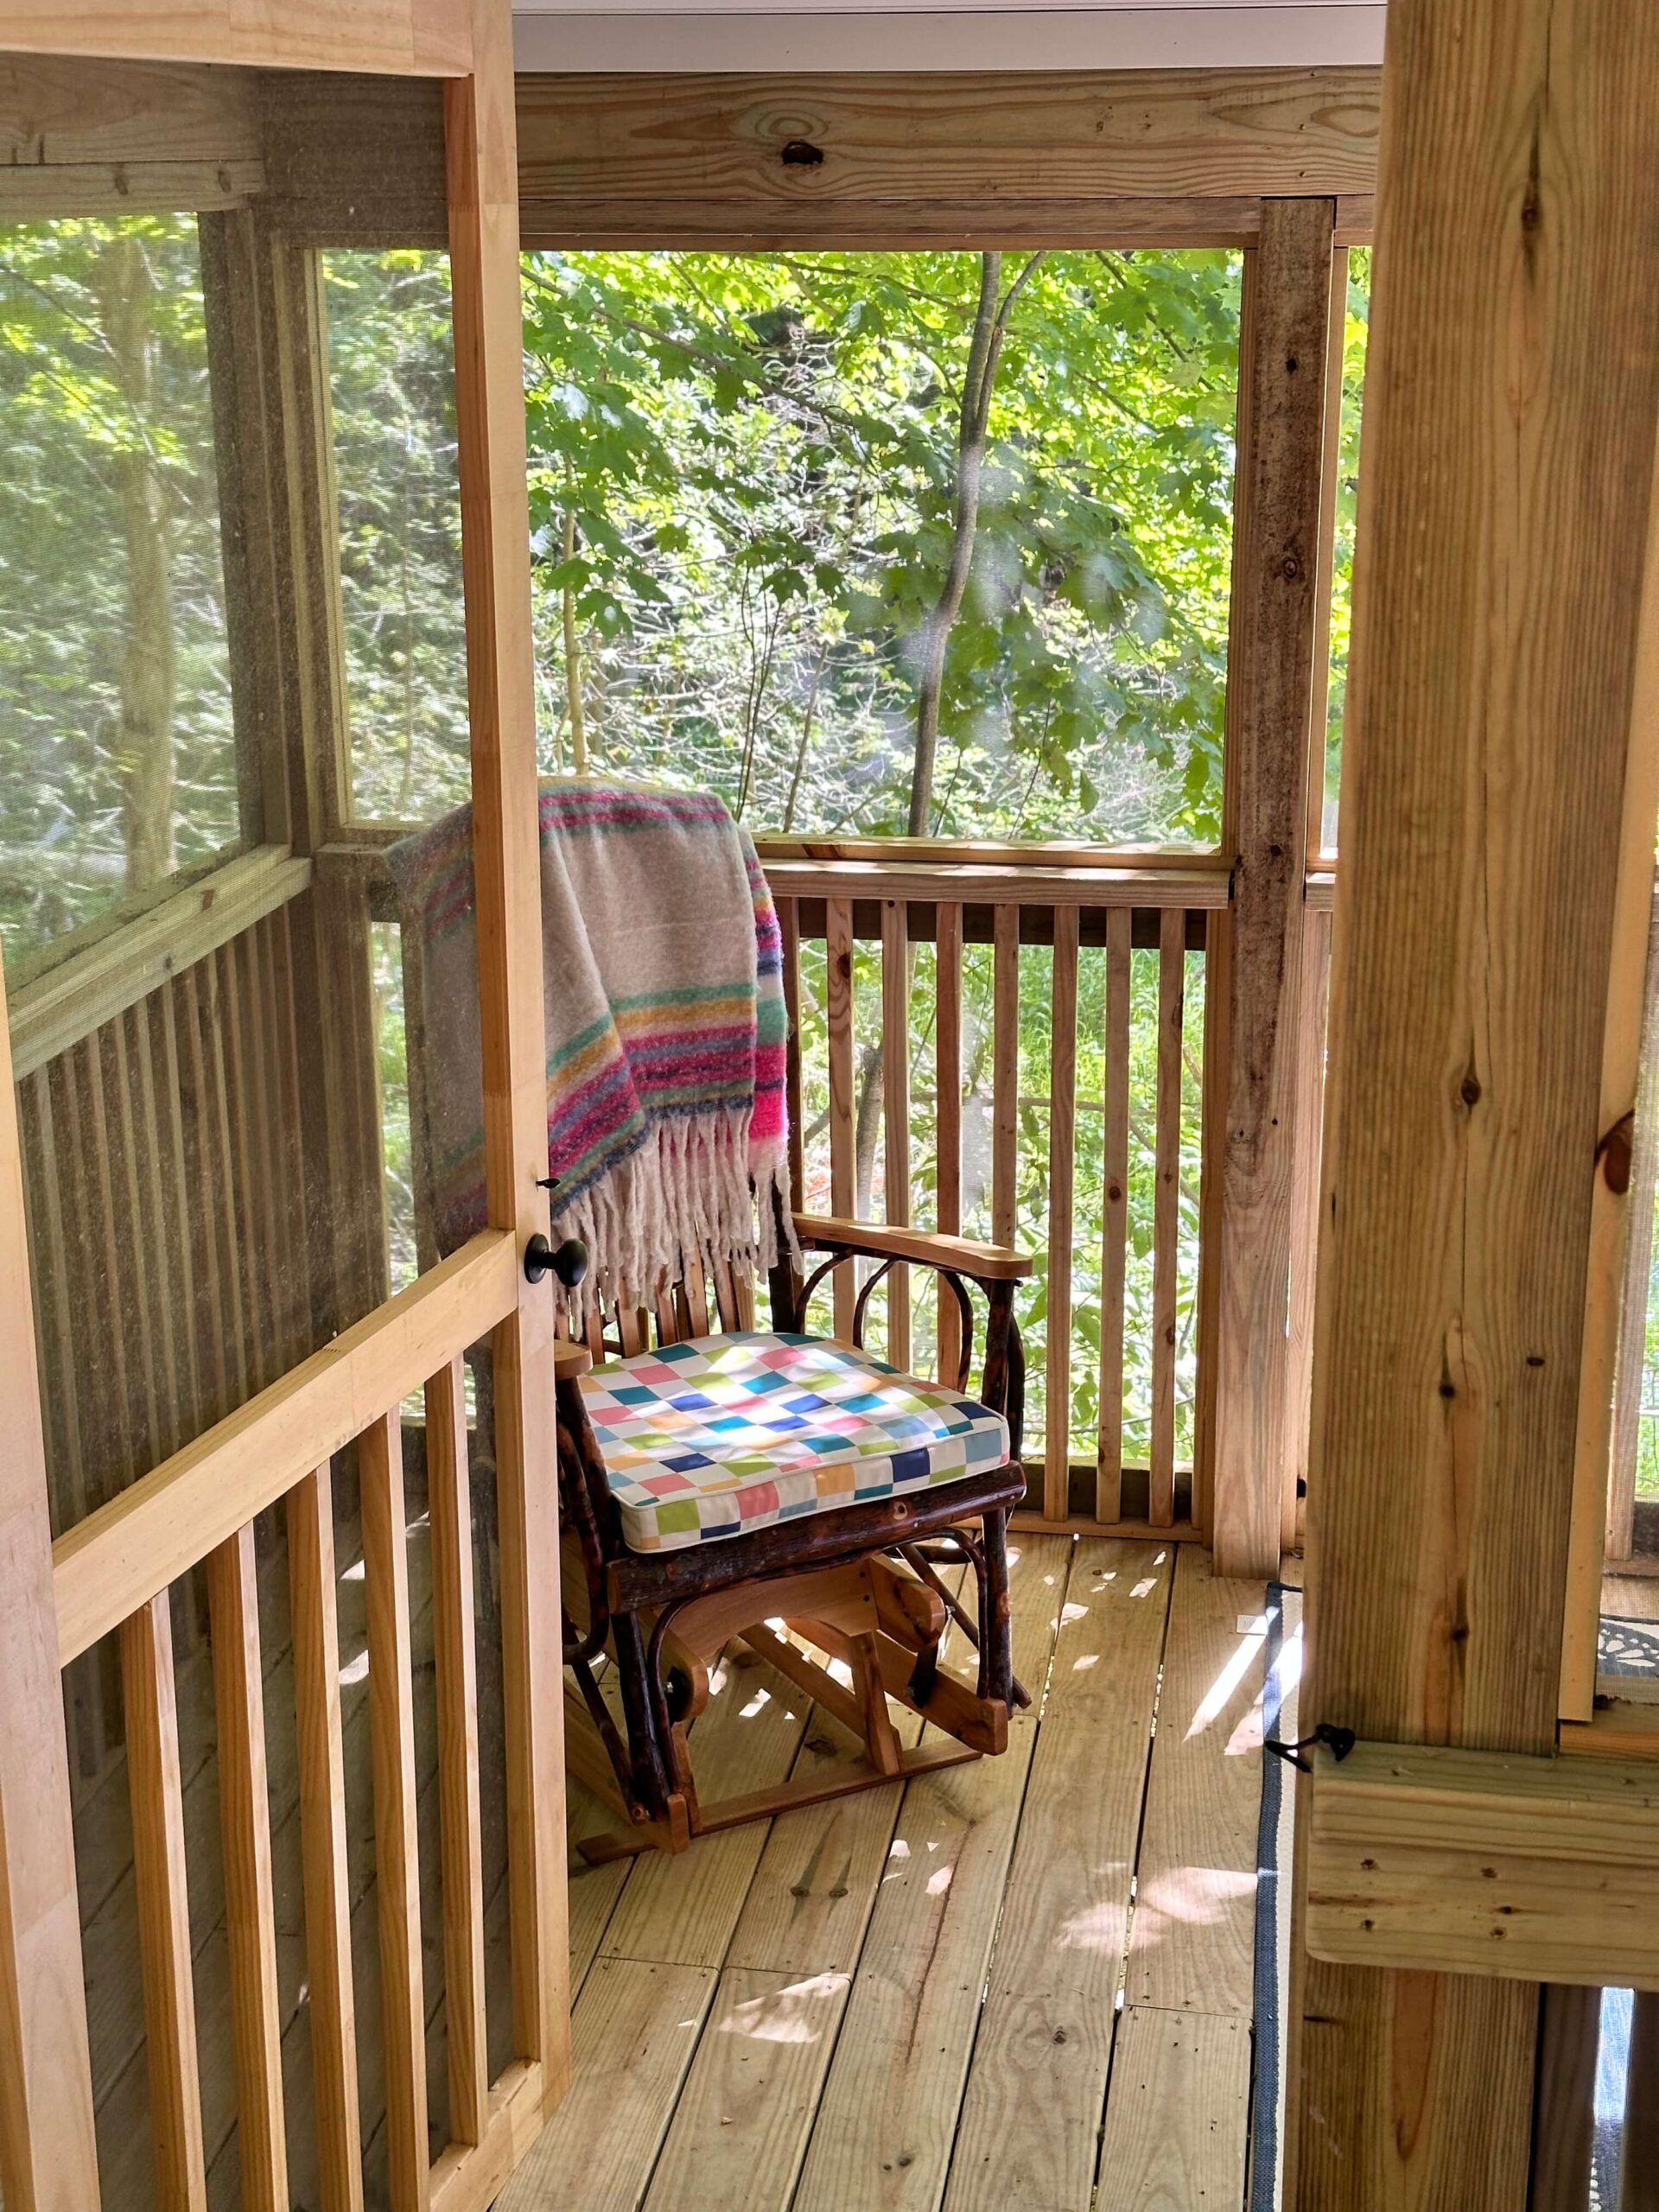 Wooden porch at a cottage in the woods.